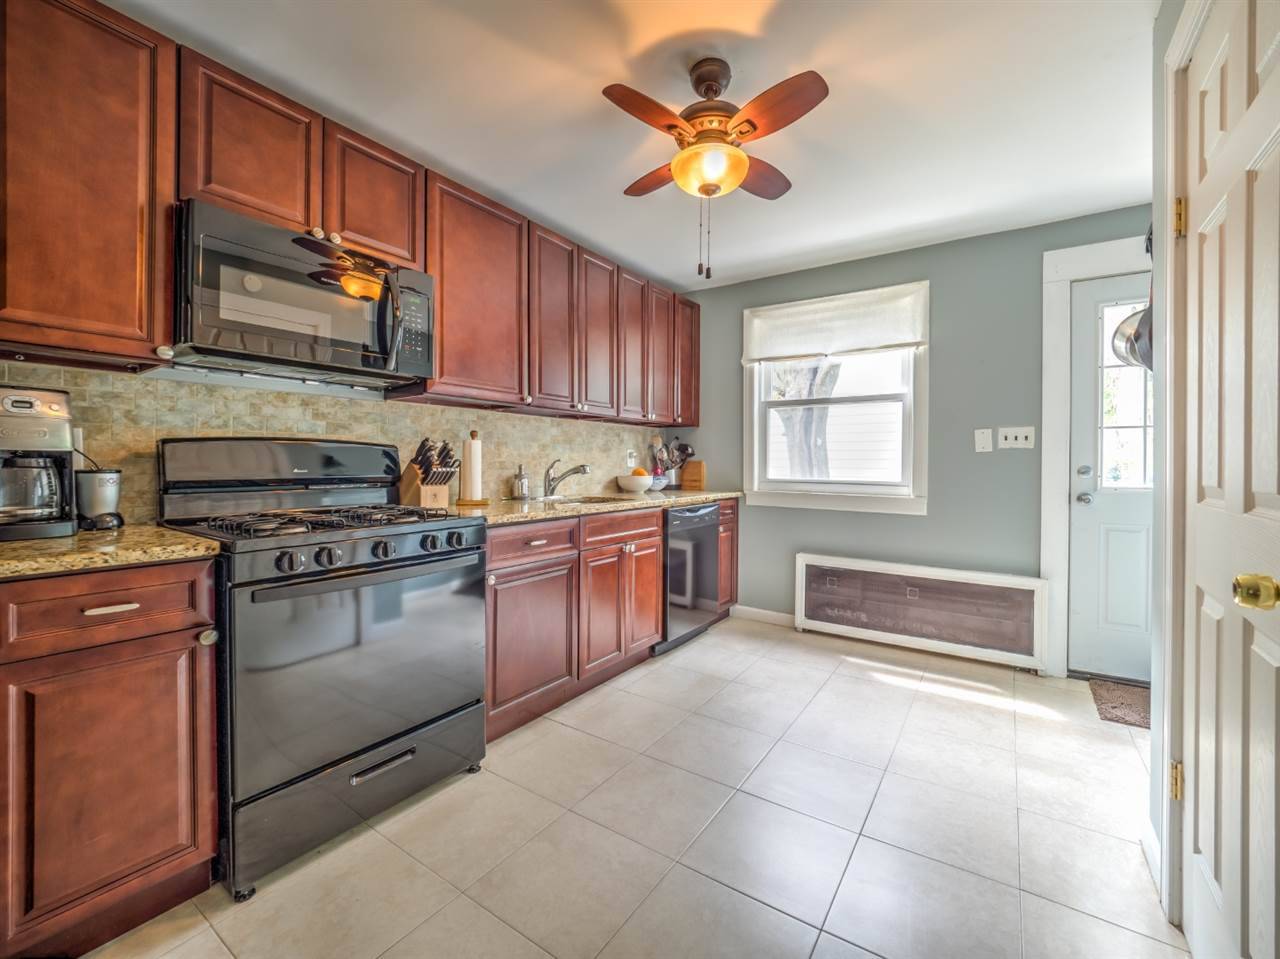 You're not going to want to miss this one - 3 BR New Jersey